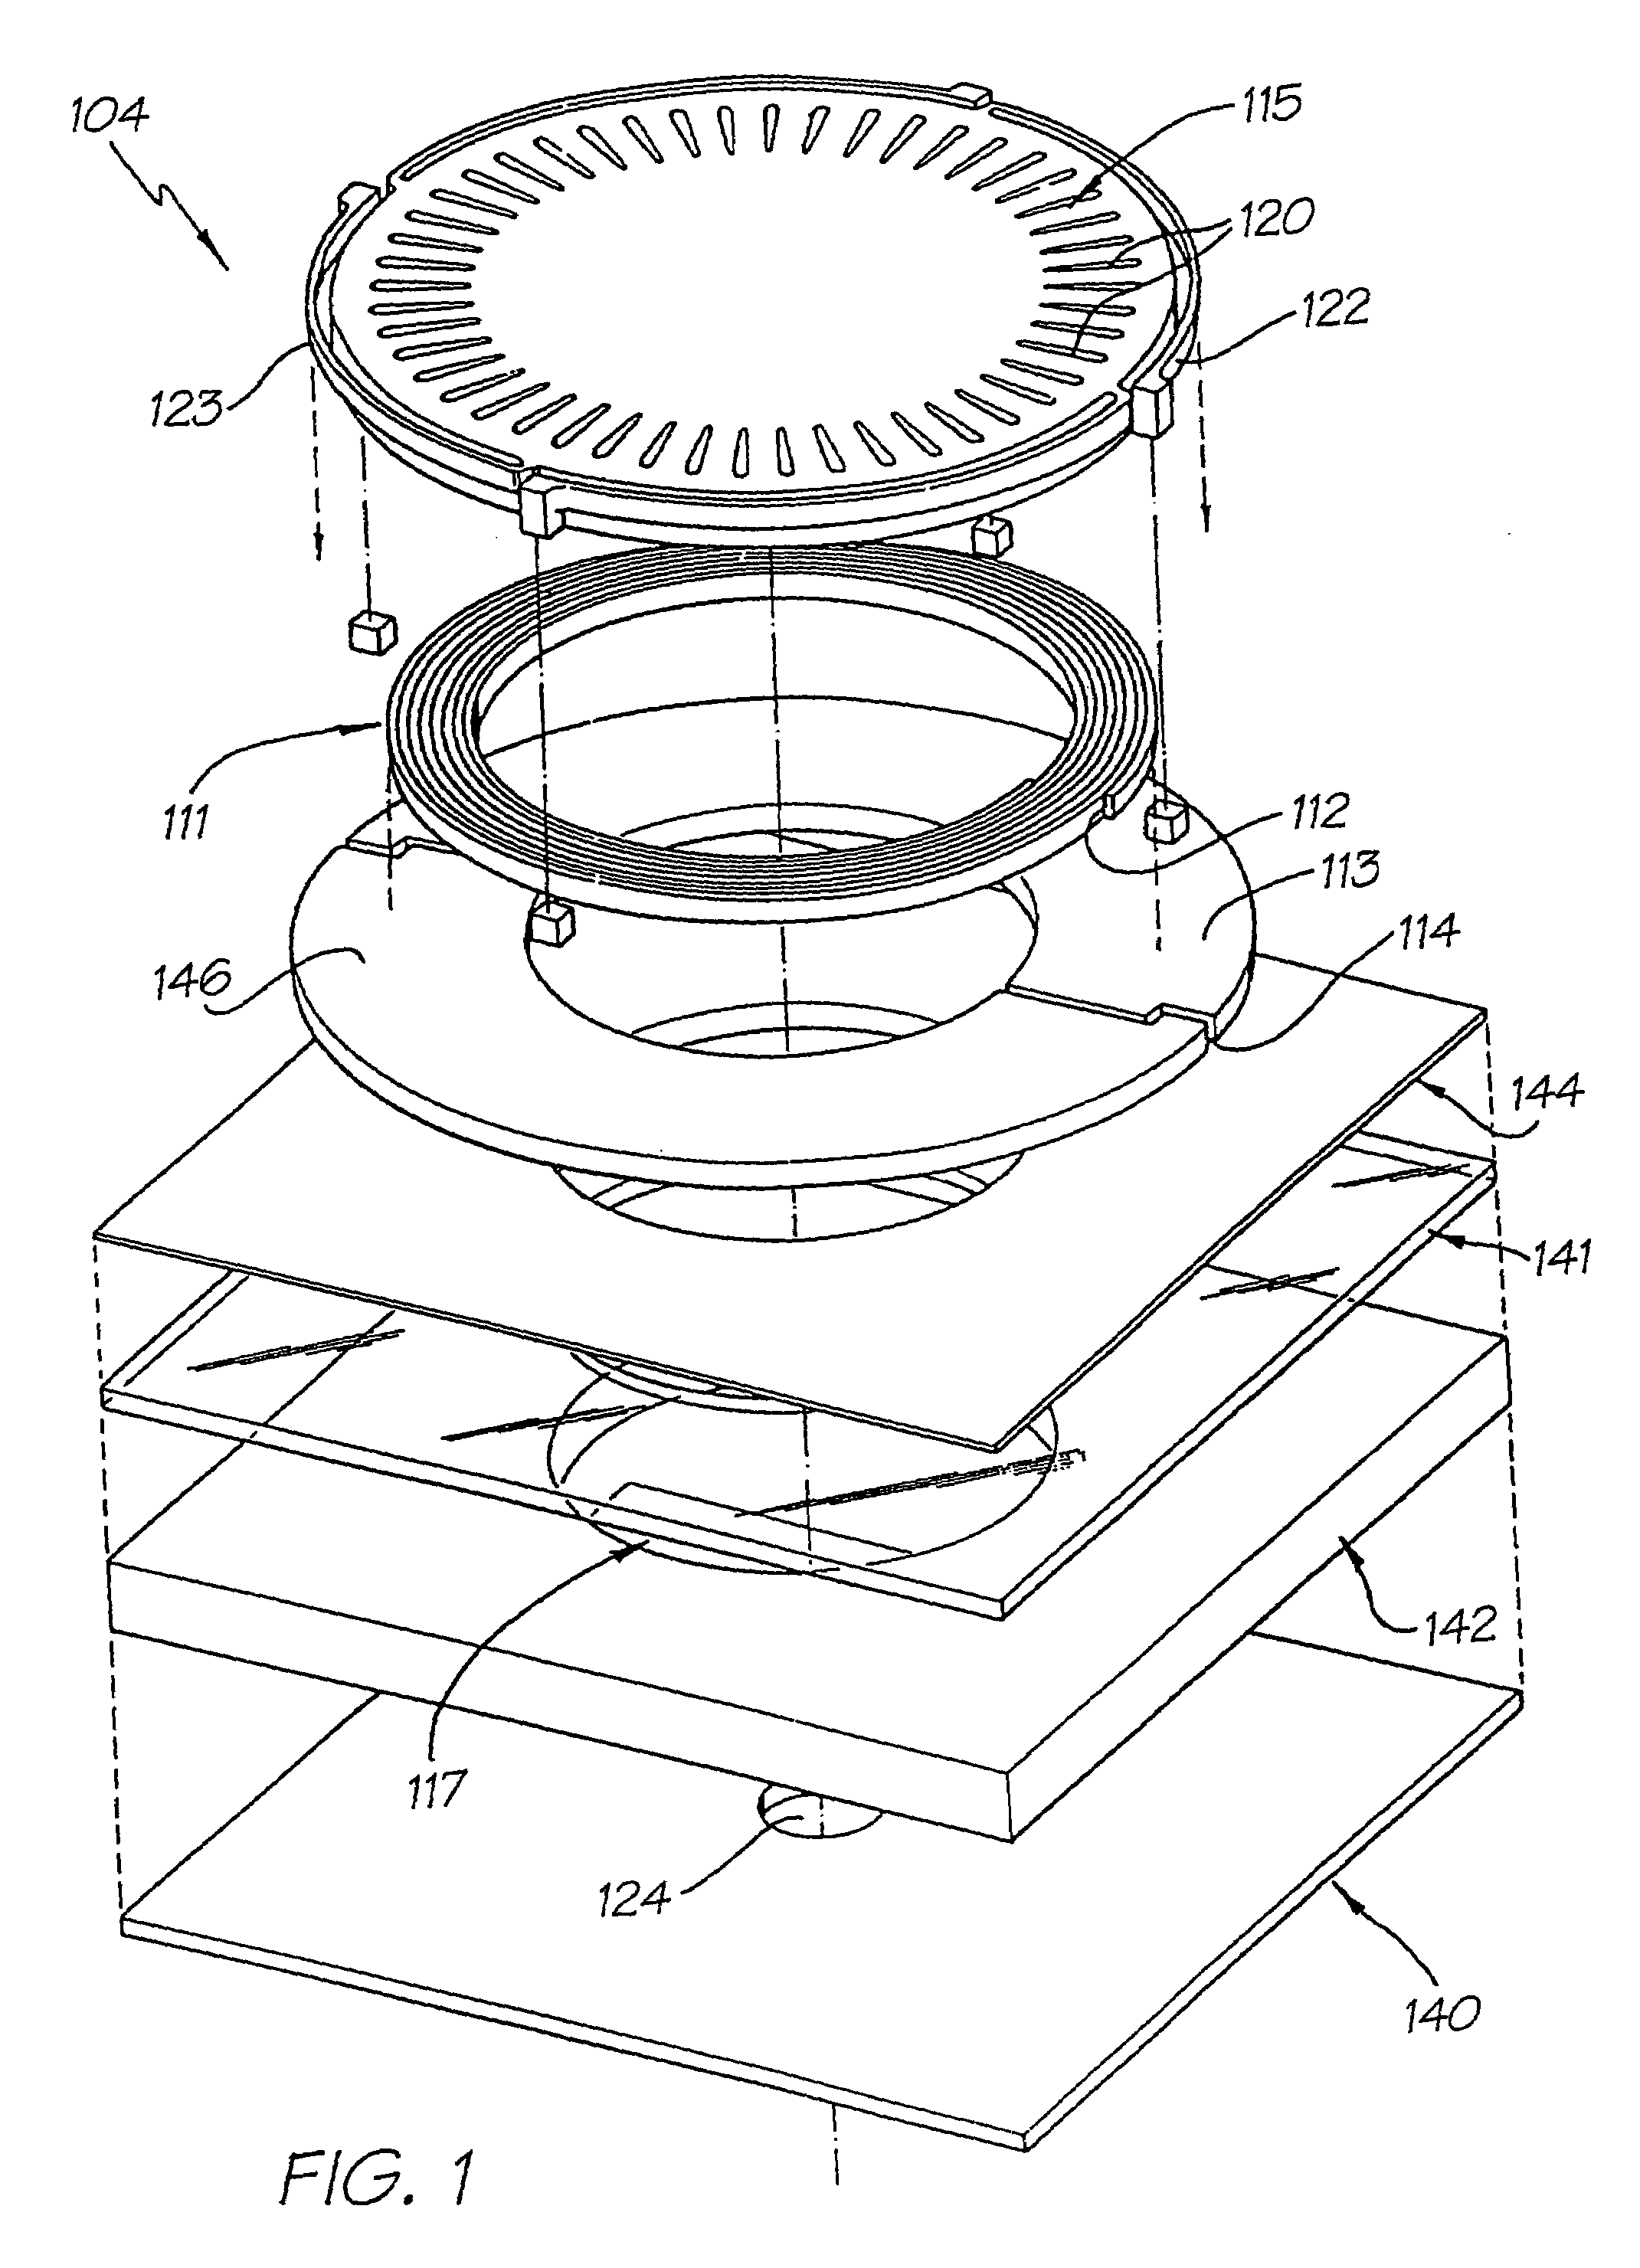 Inkjet nozzle chamber holding two fluids